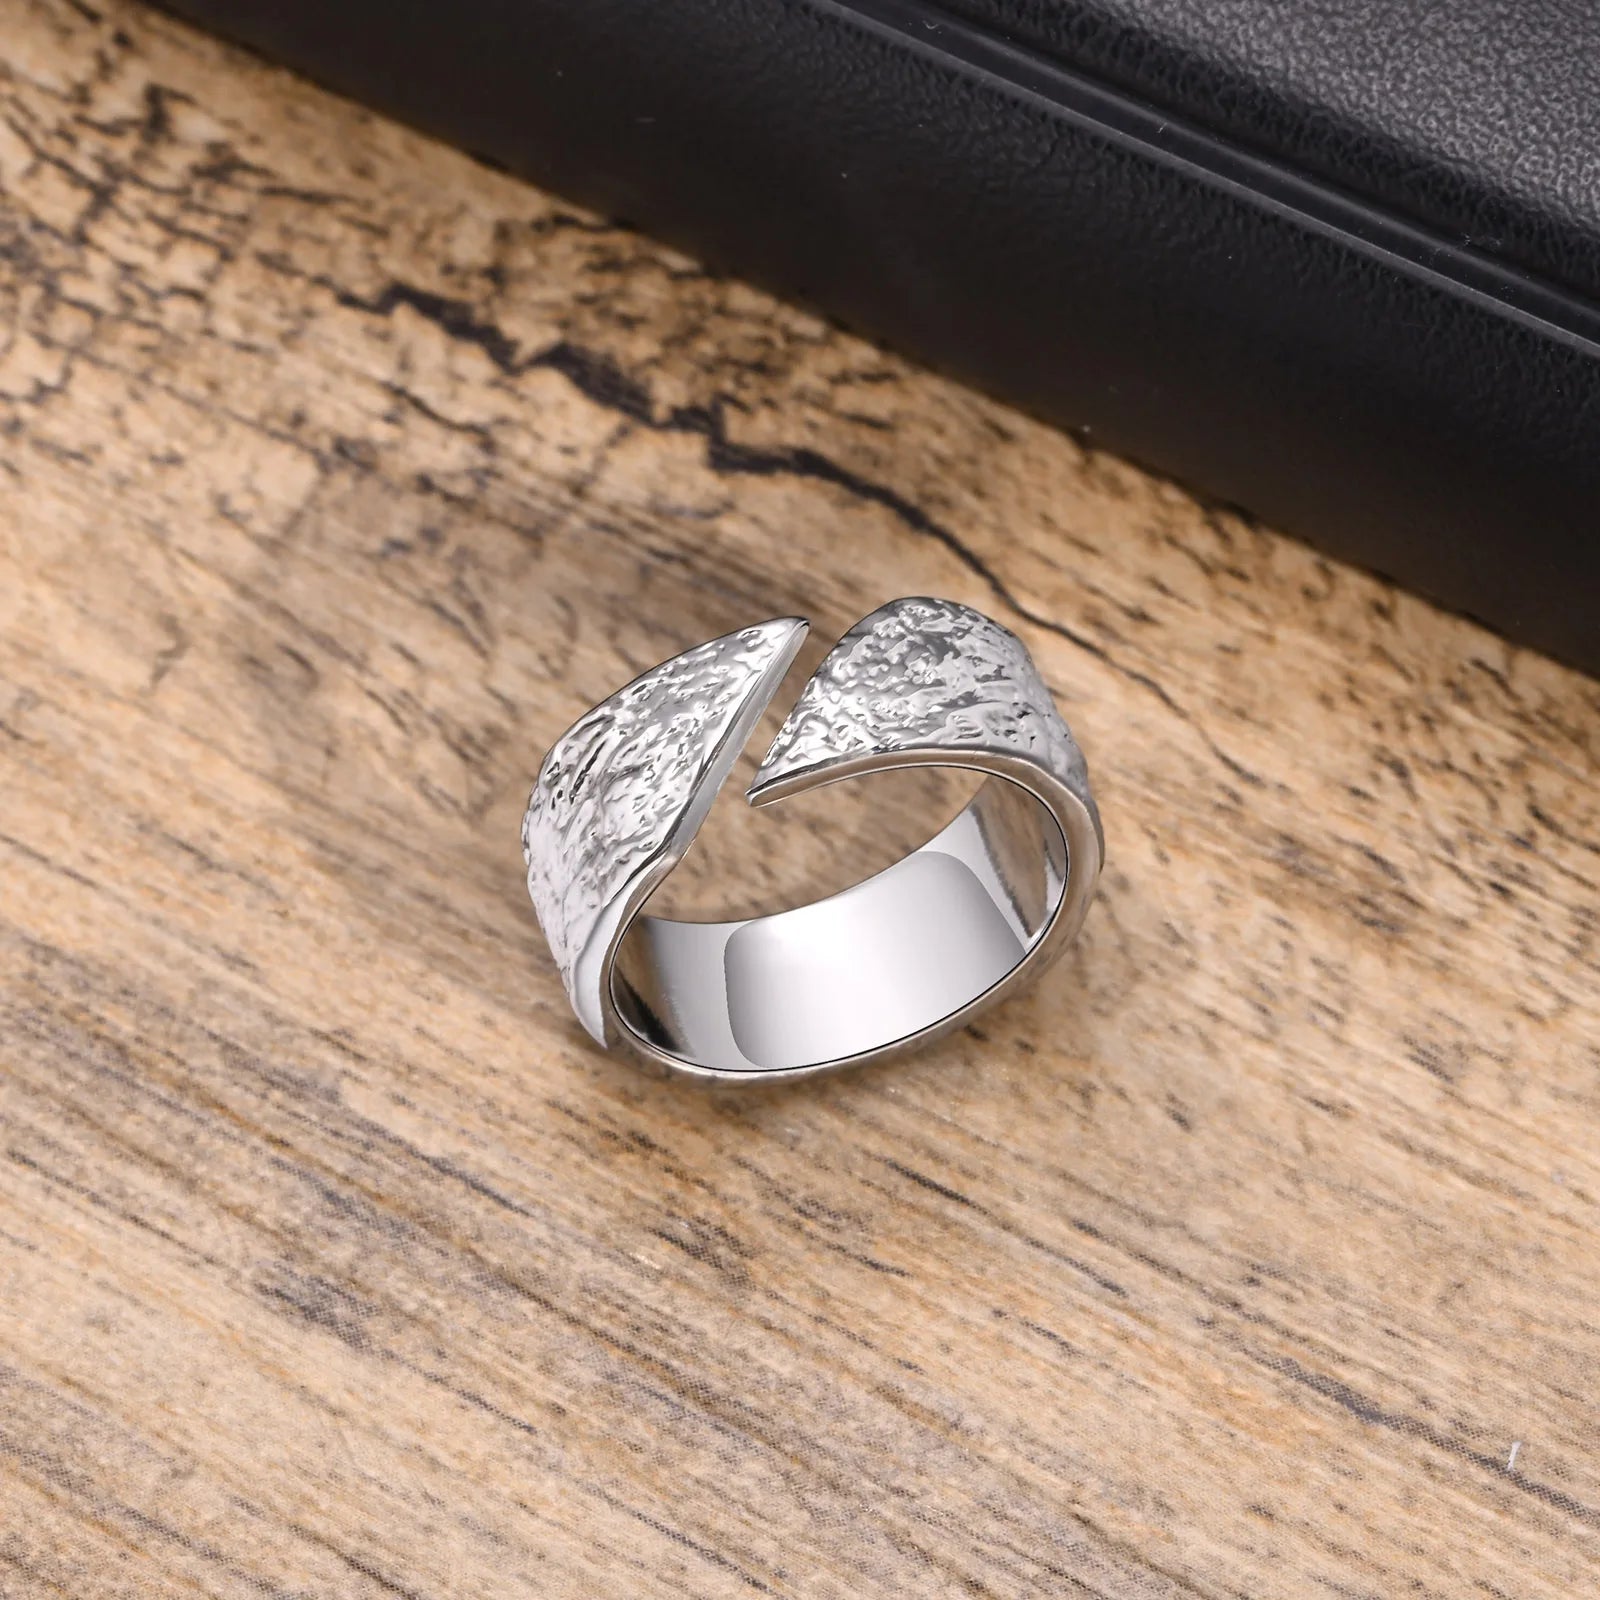 Men's Metal Copper Round Shaped Trendy Wedding Party Rings